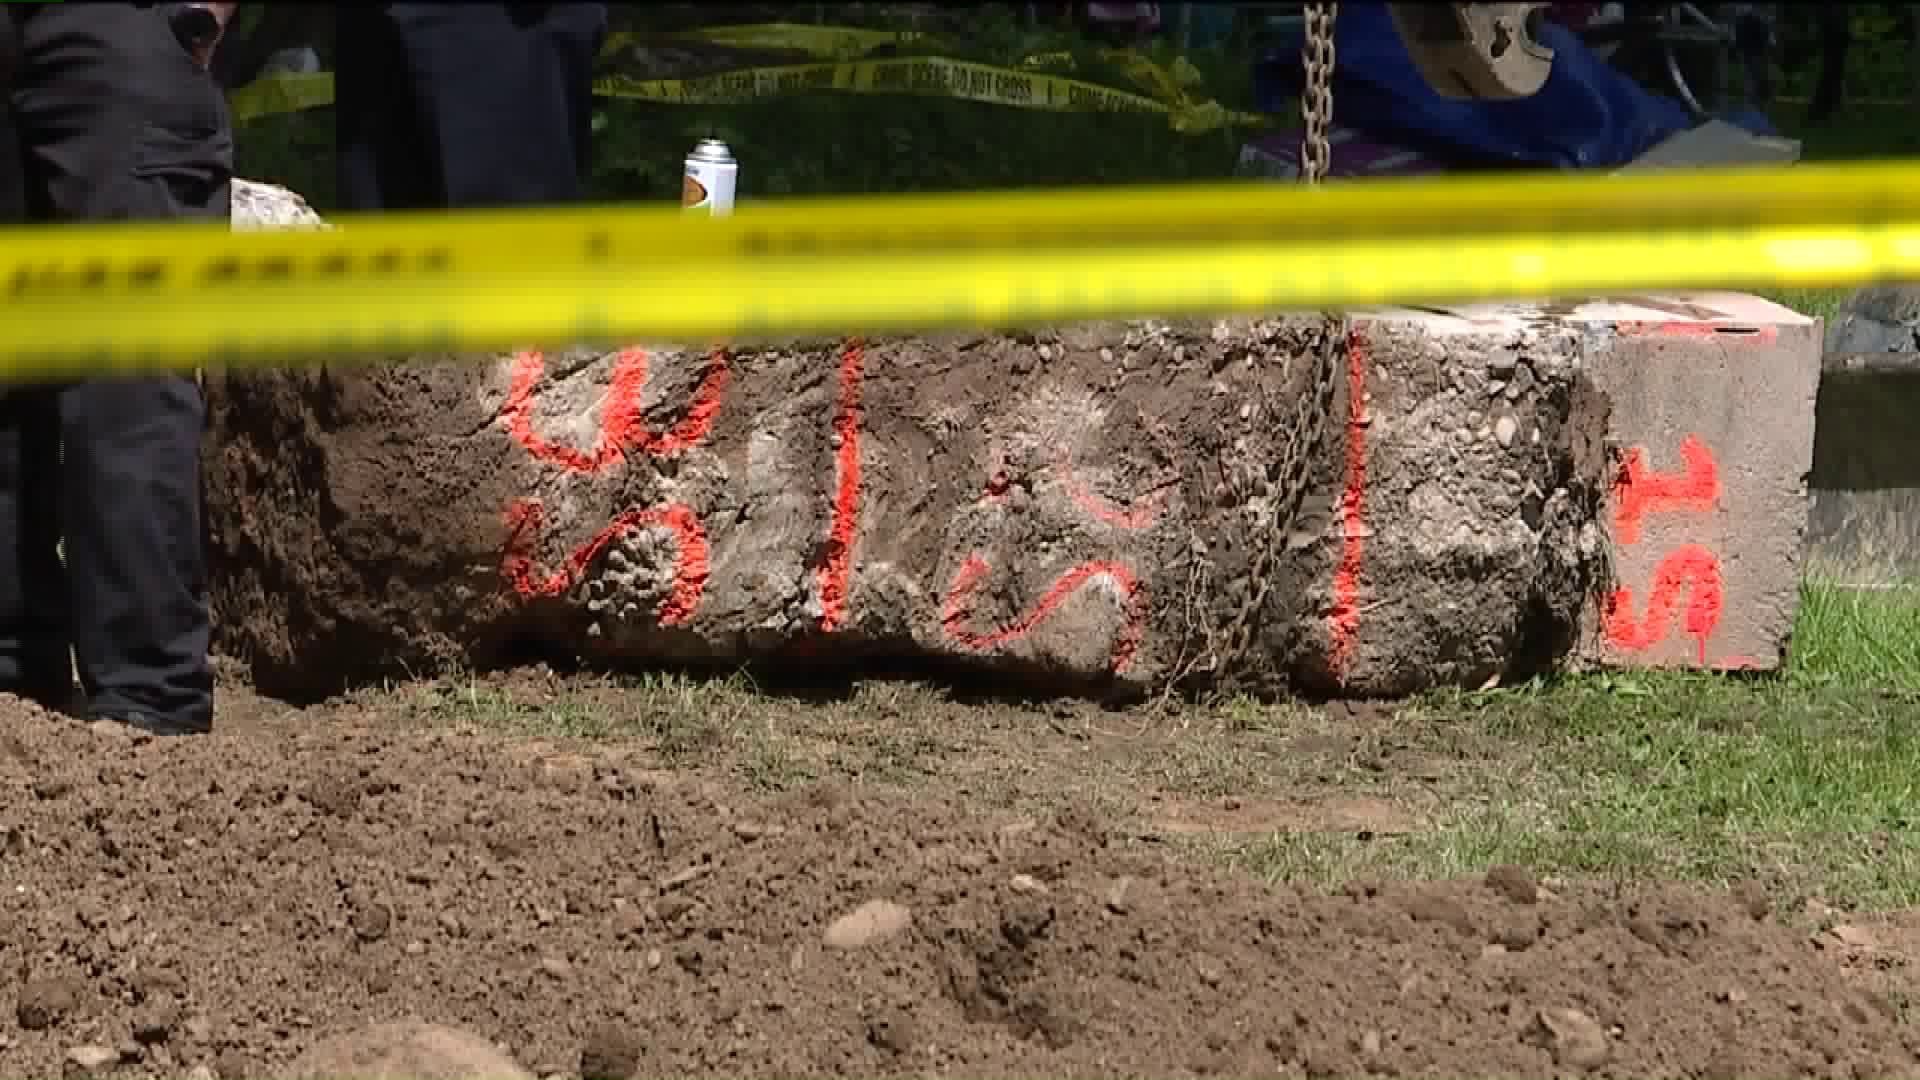 Police Chief: Wood Chips Found in Concrete During Barbara Miller Search